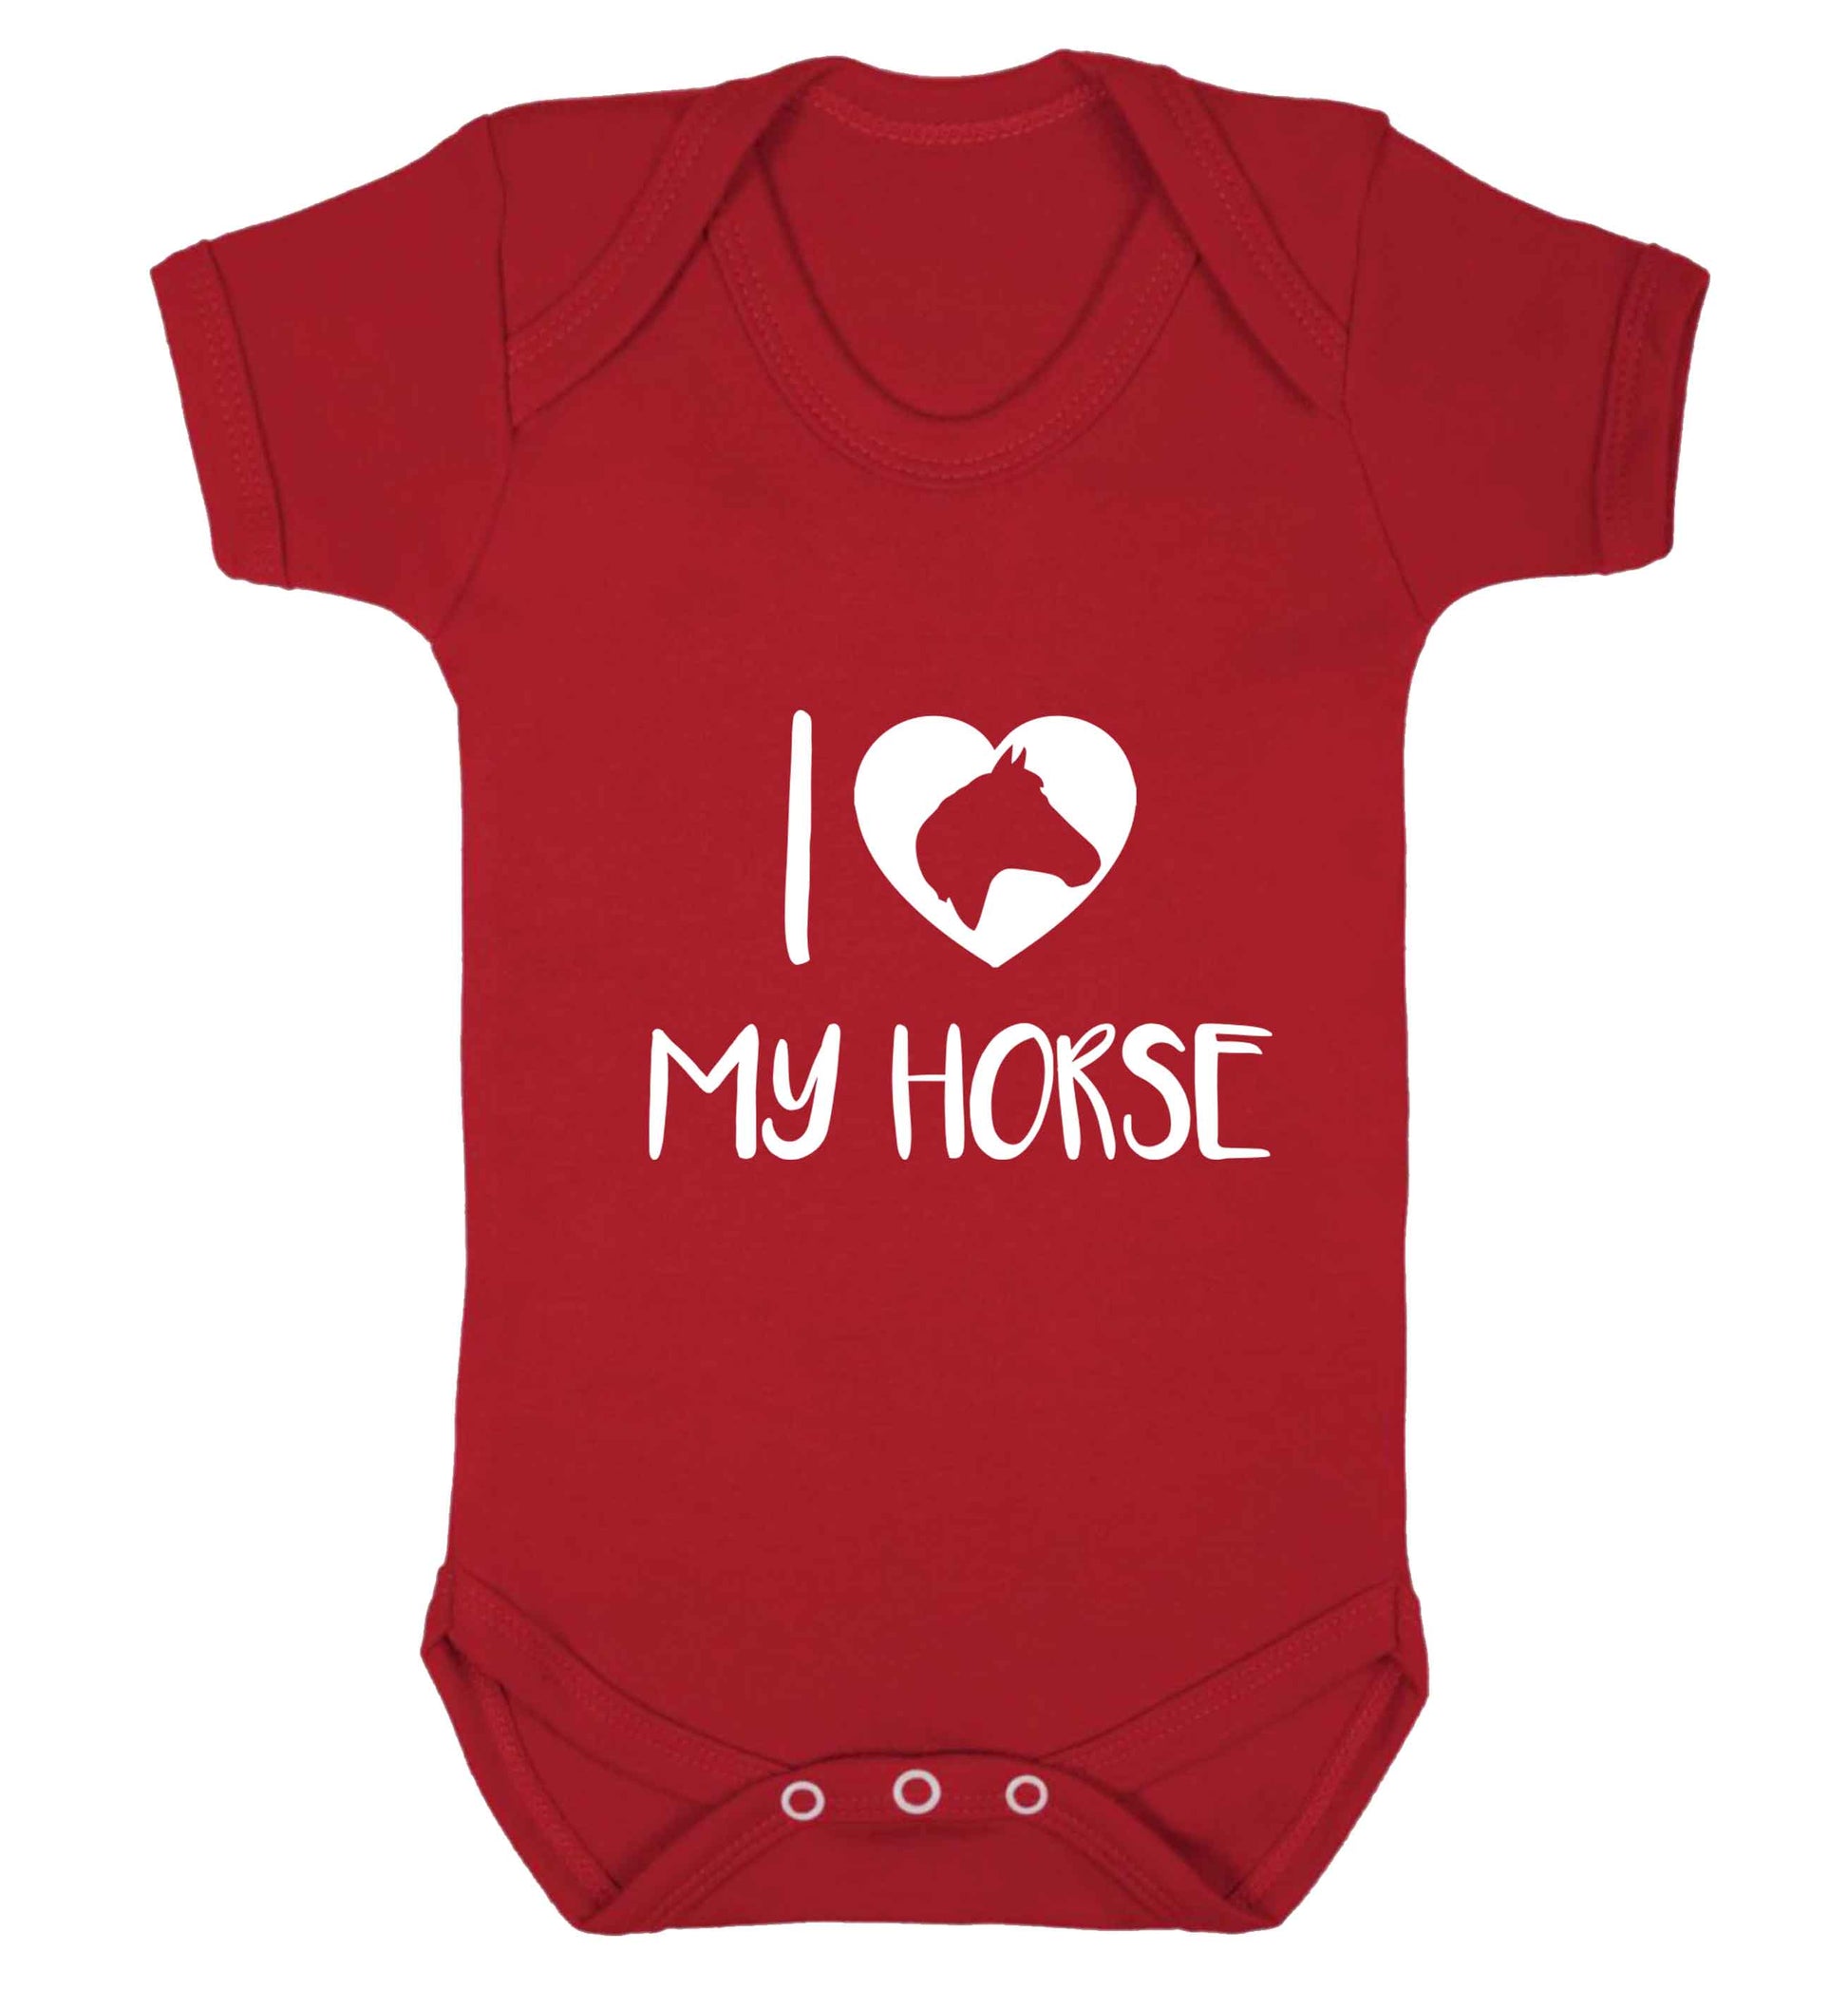 I love my horse baby vest red 18-24 months